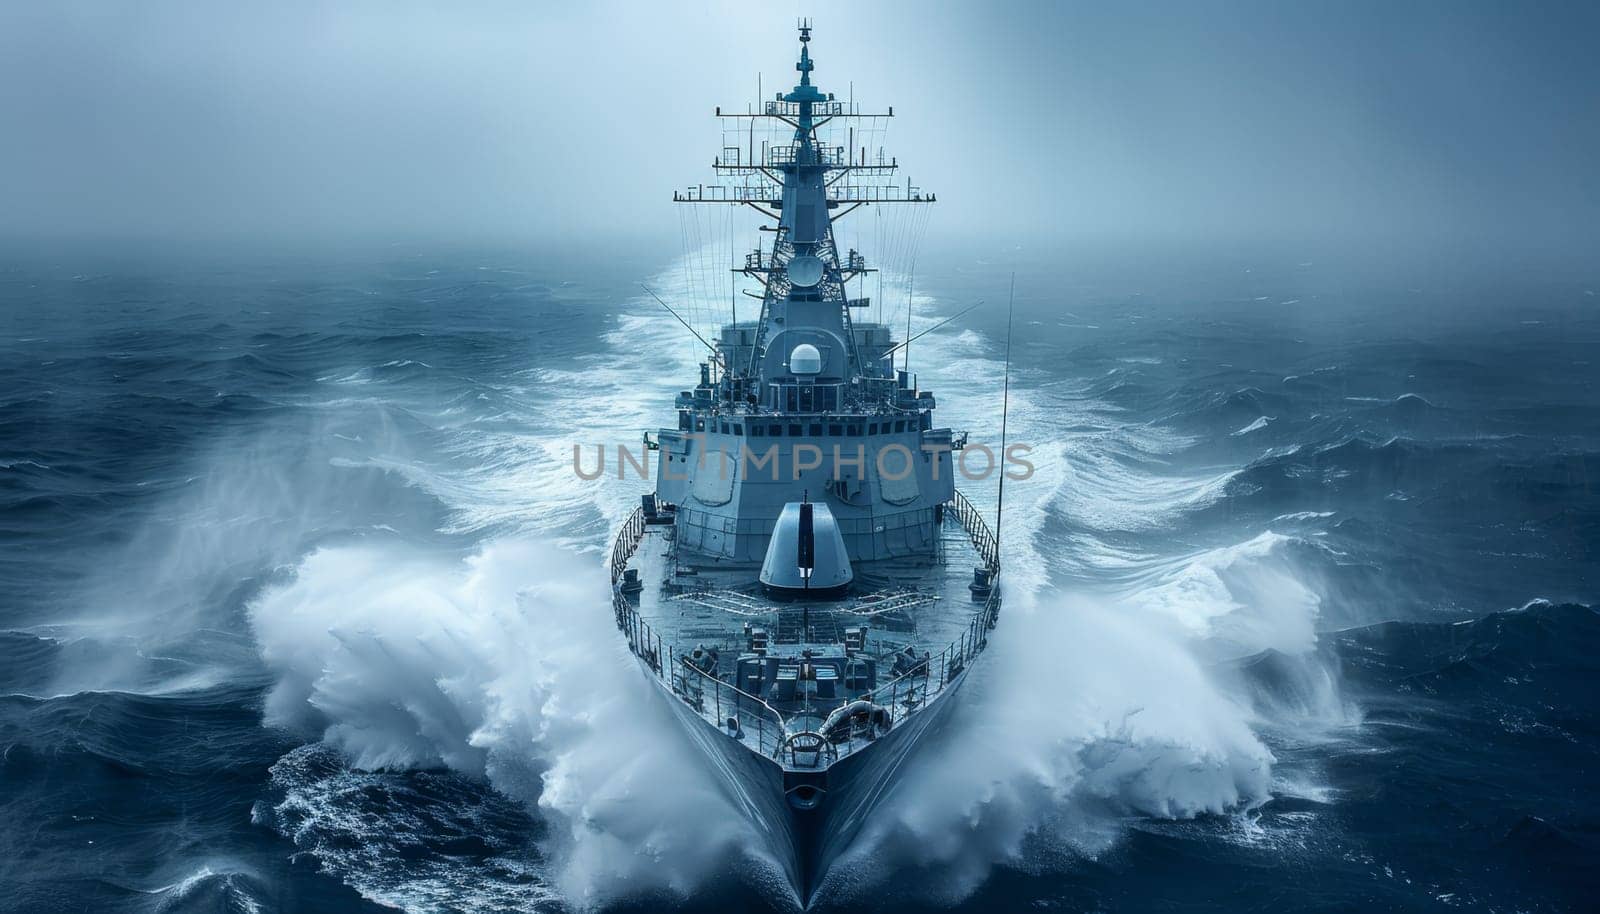 A large navy ship is sailing through rough waters by AI generated image.